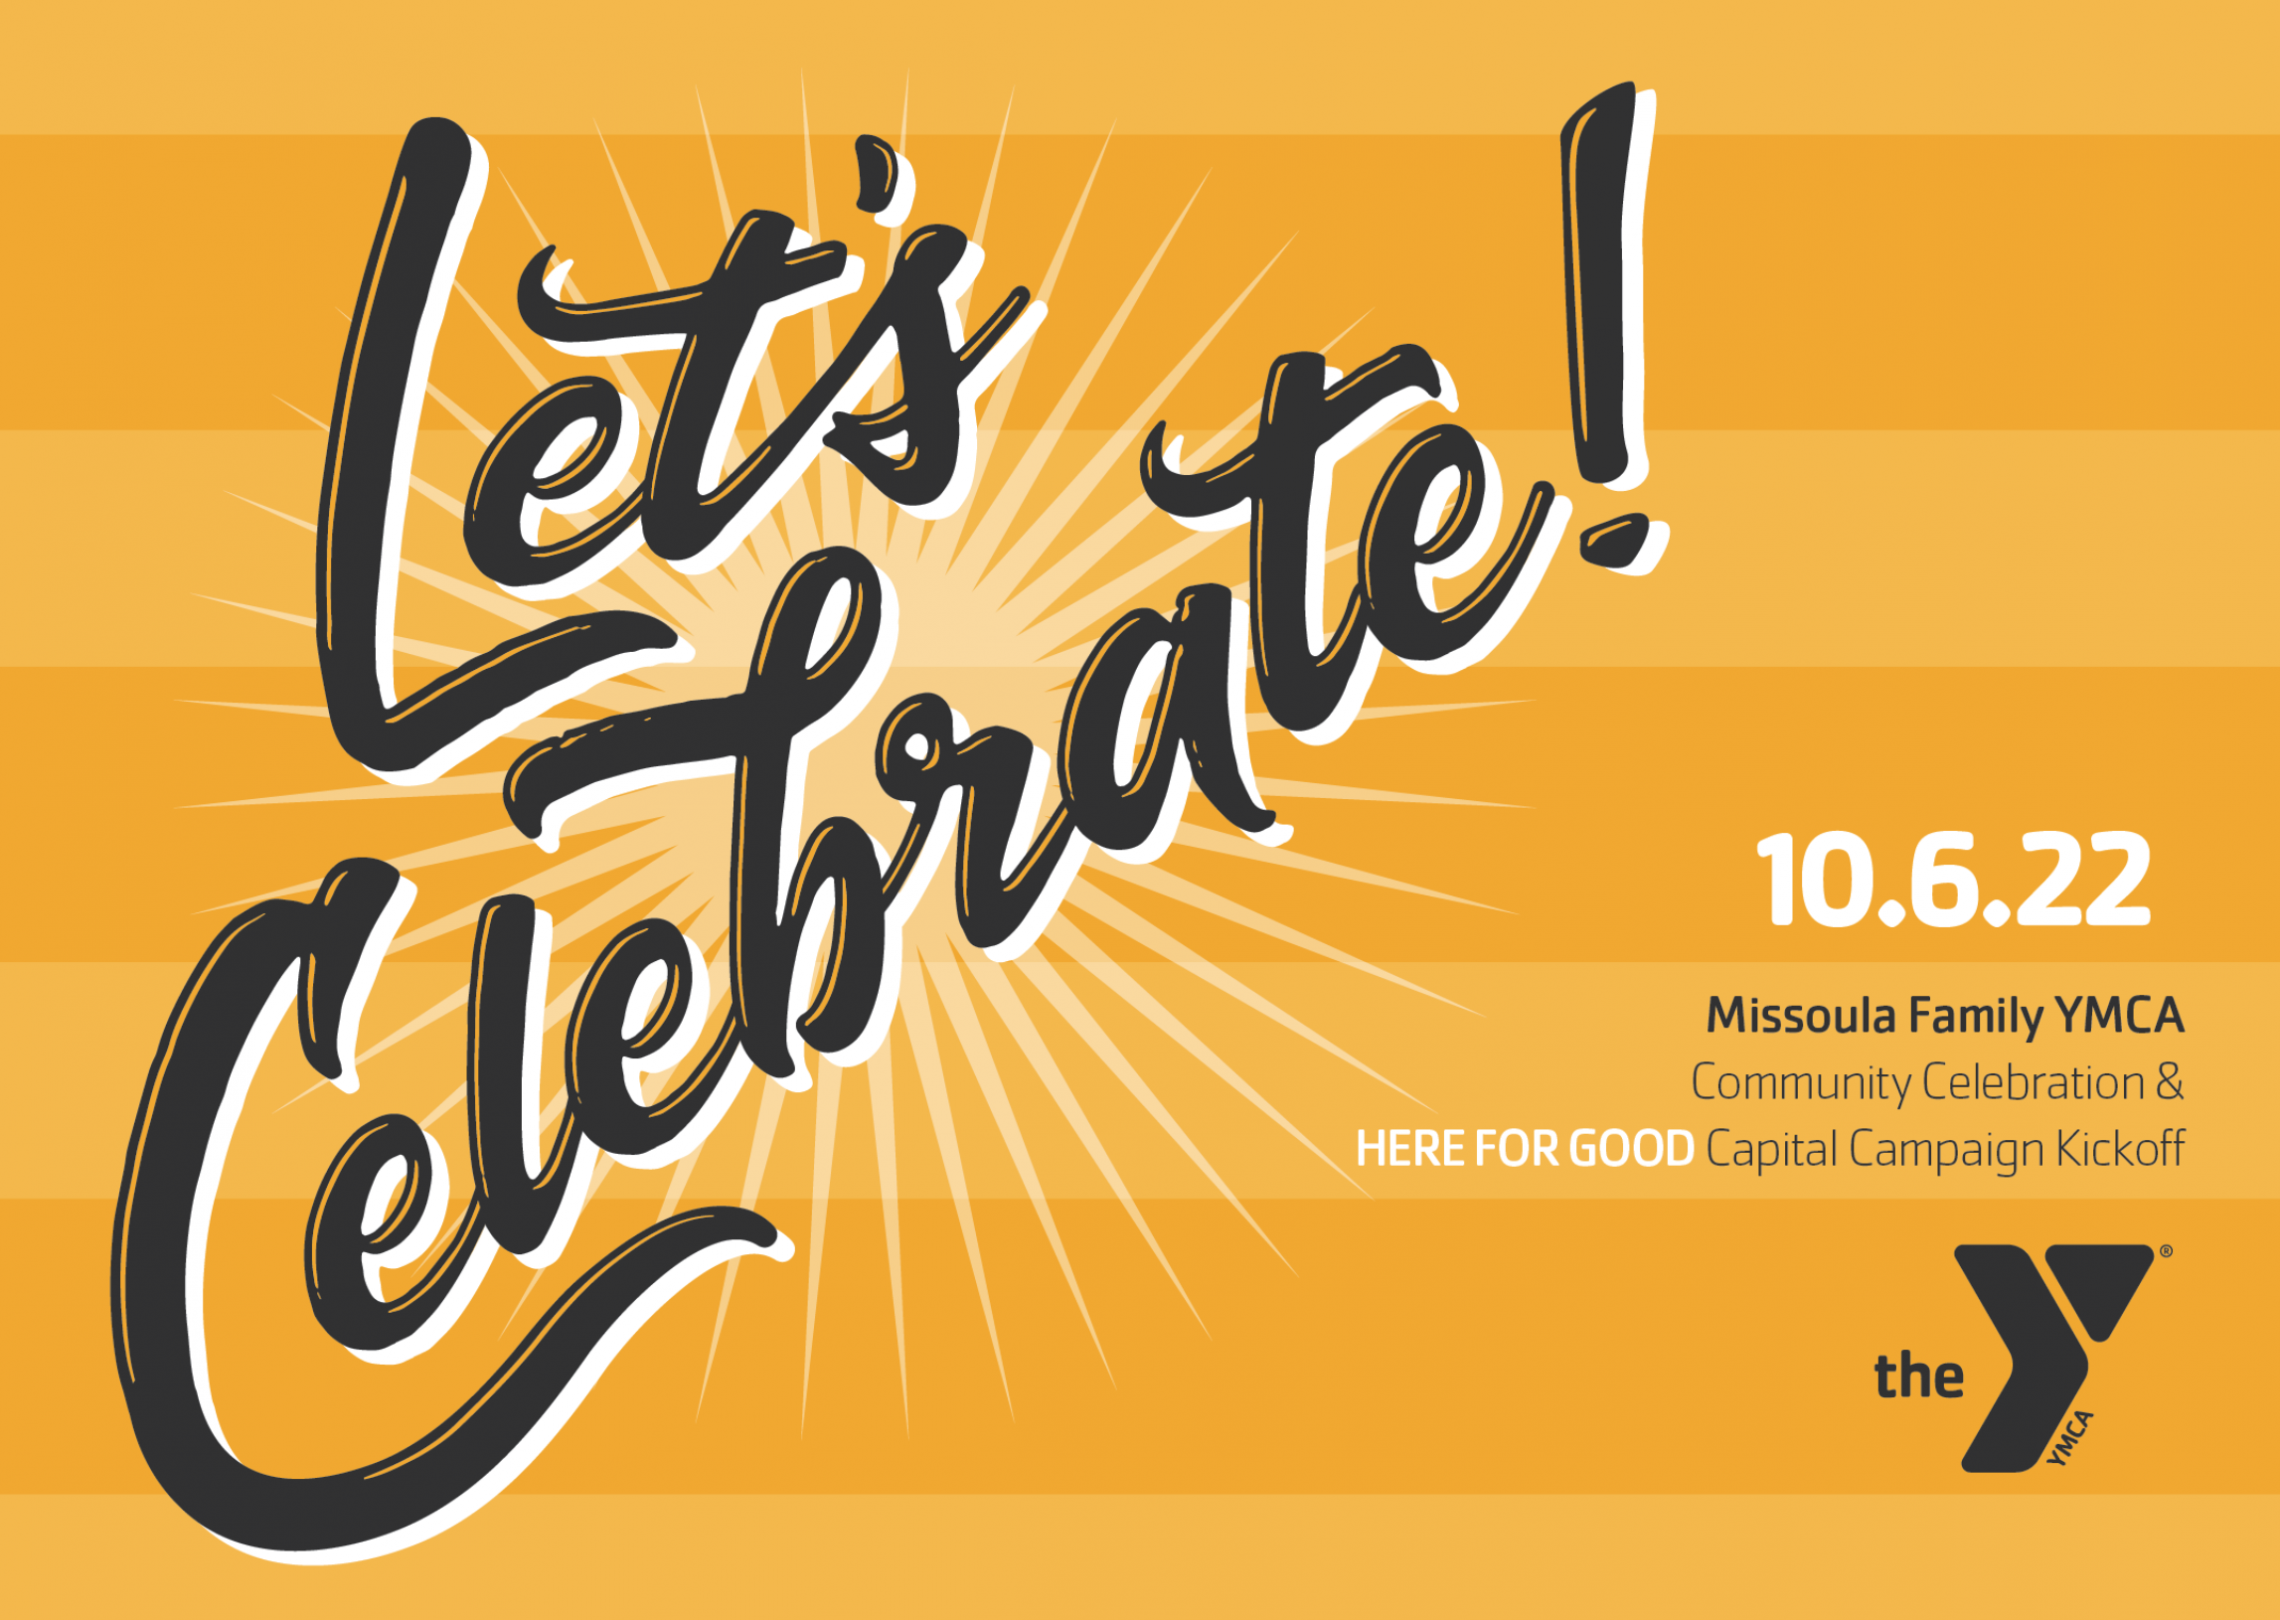 yellow background with decorative text that says "let's celebrate." there is a black ymca logo in the corner and the following text: october 6 2022 missoula family ymca community celebration and here for good capital campaign kickoff